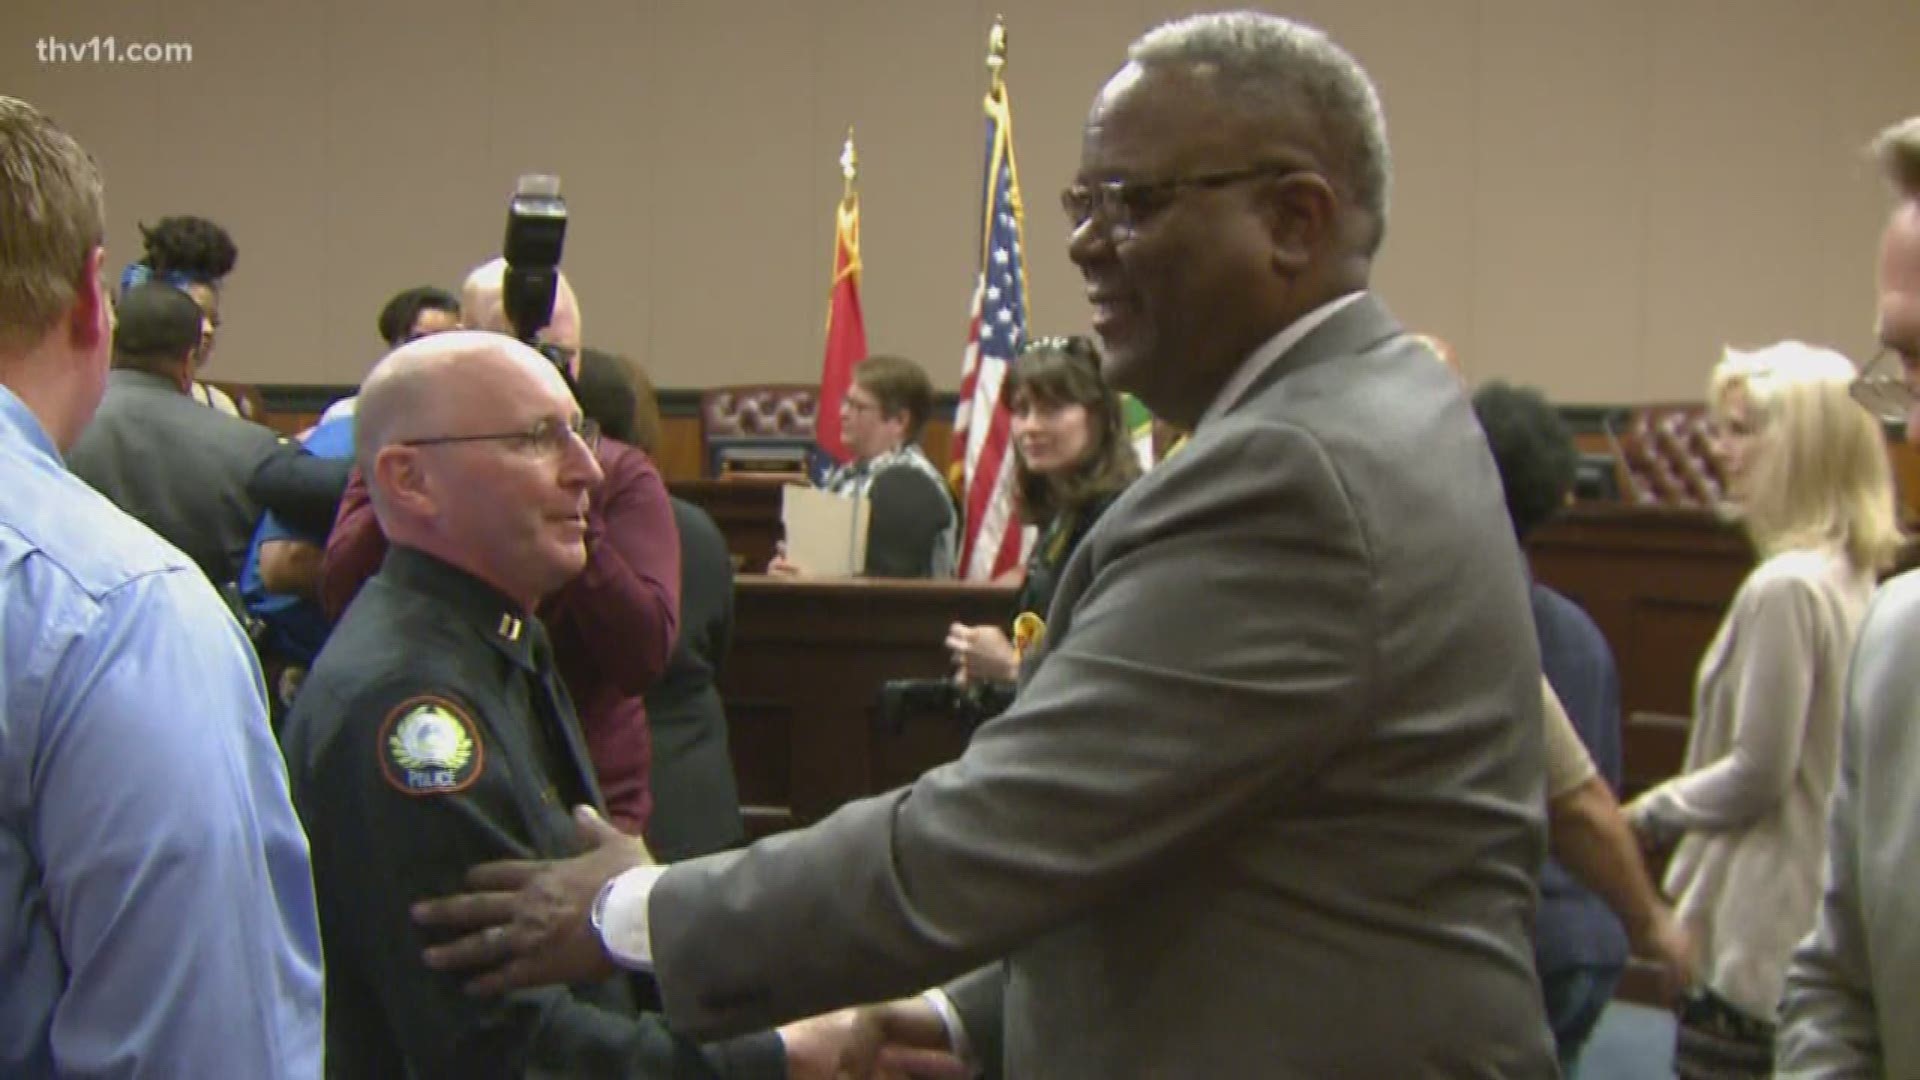 Today marks a new era at the Little Rock Police Department as a new chief takes over.